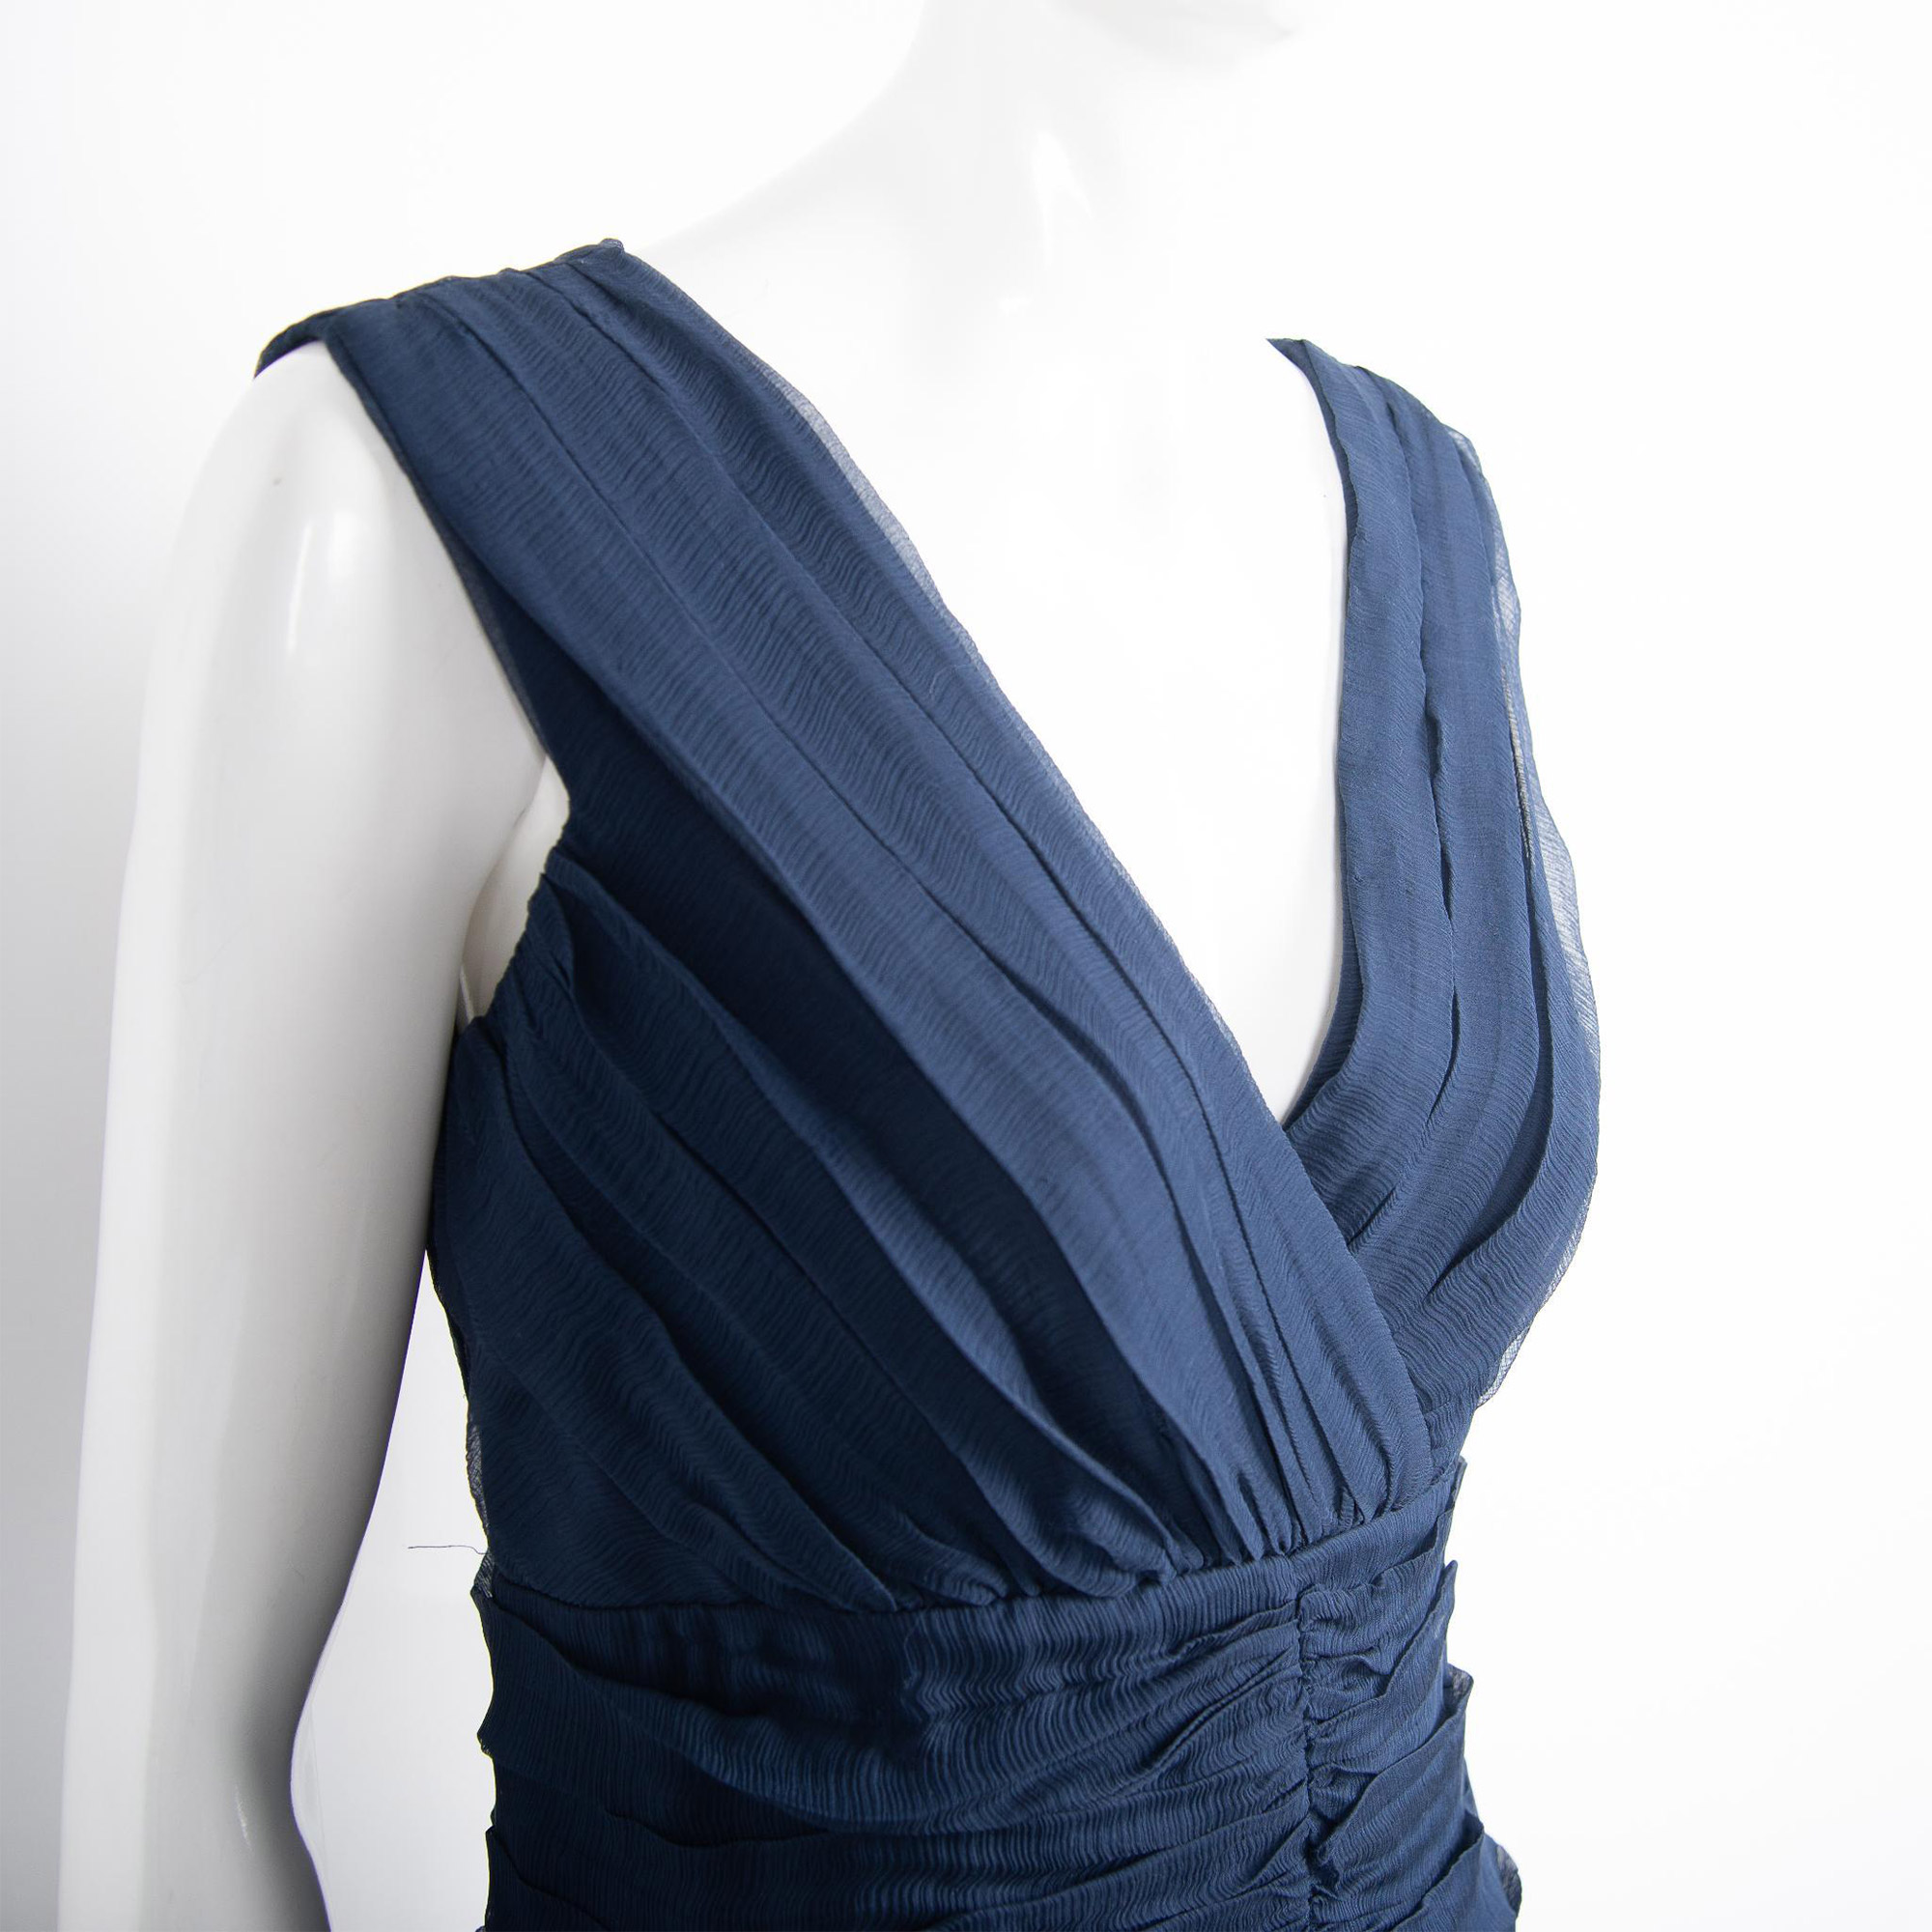 Tadashi Collection Ruched Silk Cocktail Dress, Size 12 - Image 4 of 9